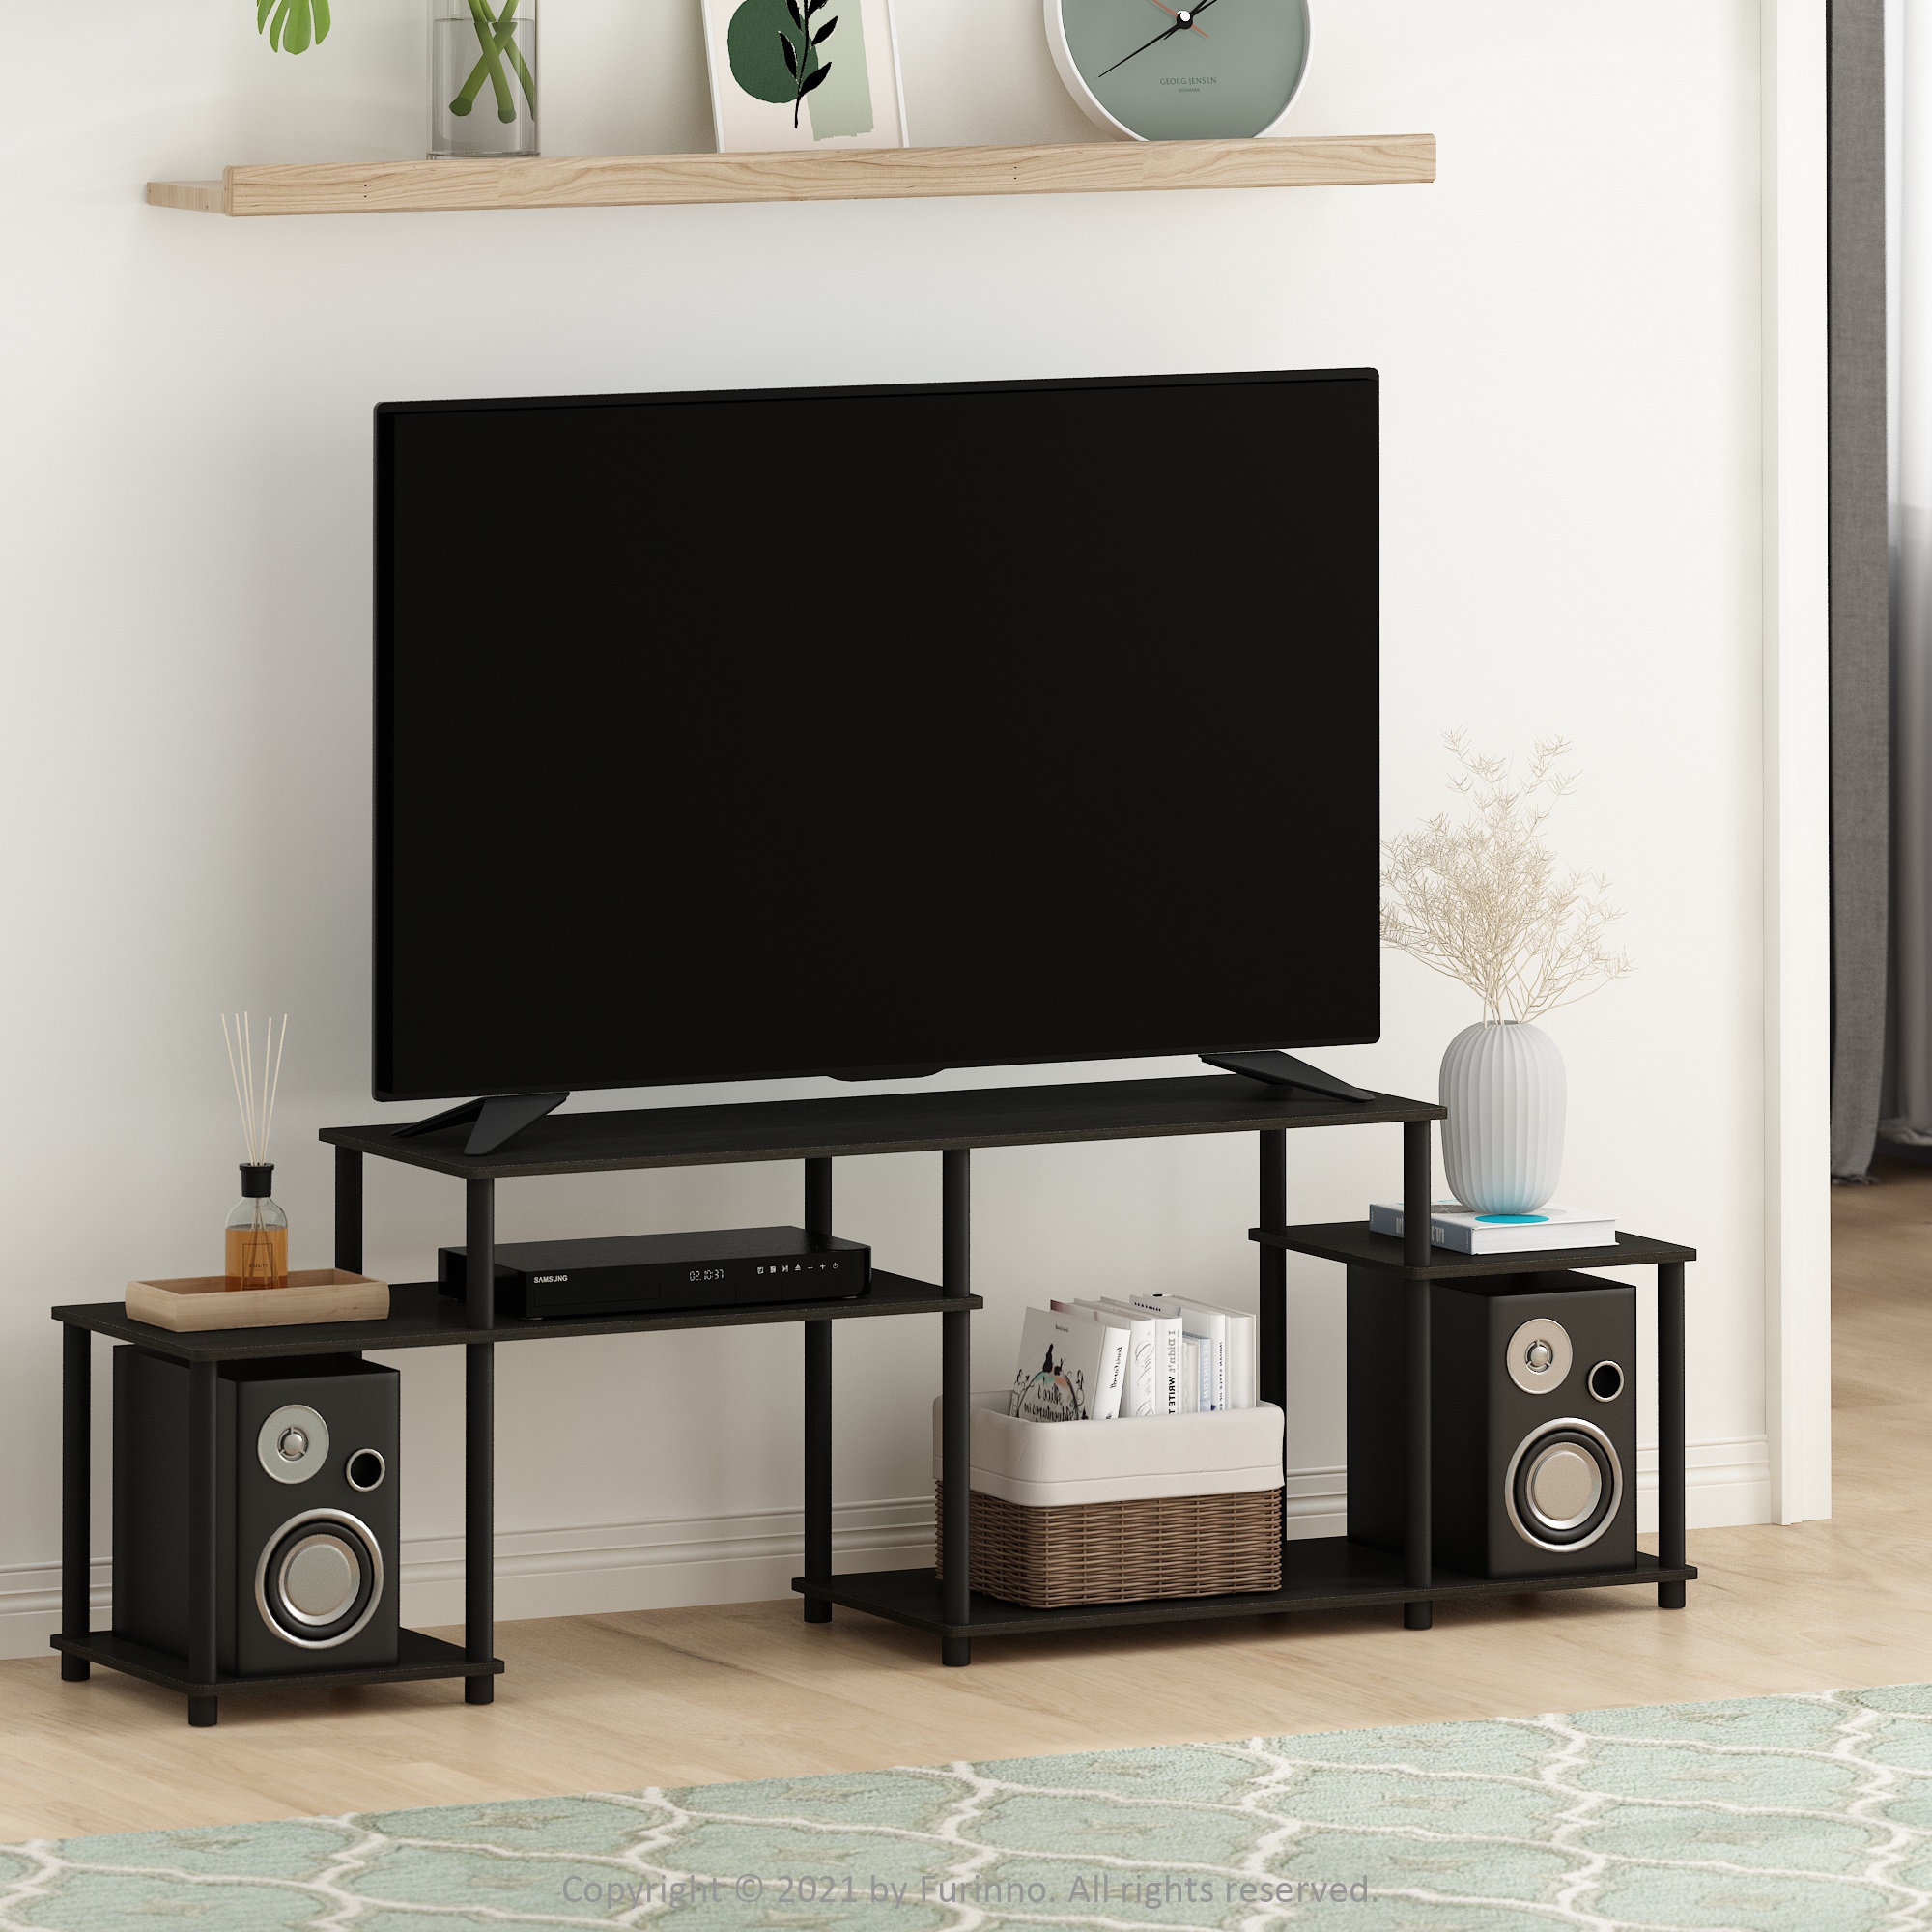 Furinno Turn-N-Tube Handel TV Stand for TV up to 55 Inch, Espresso/Black - image 2 of 3